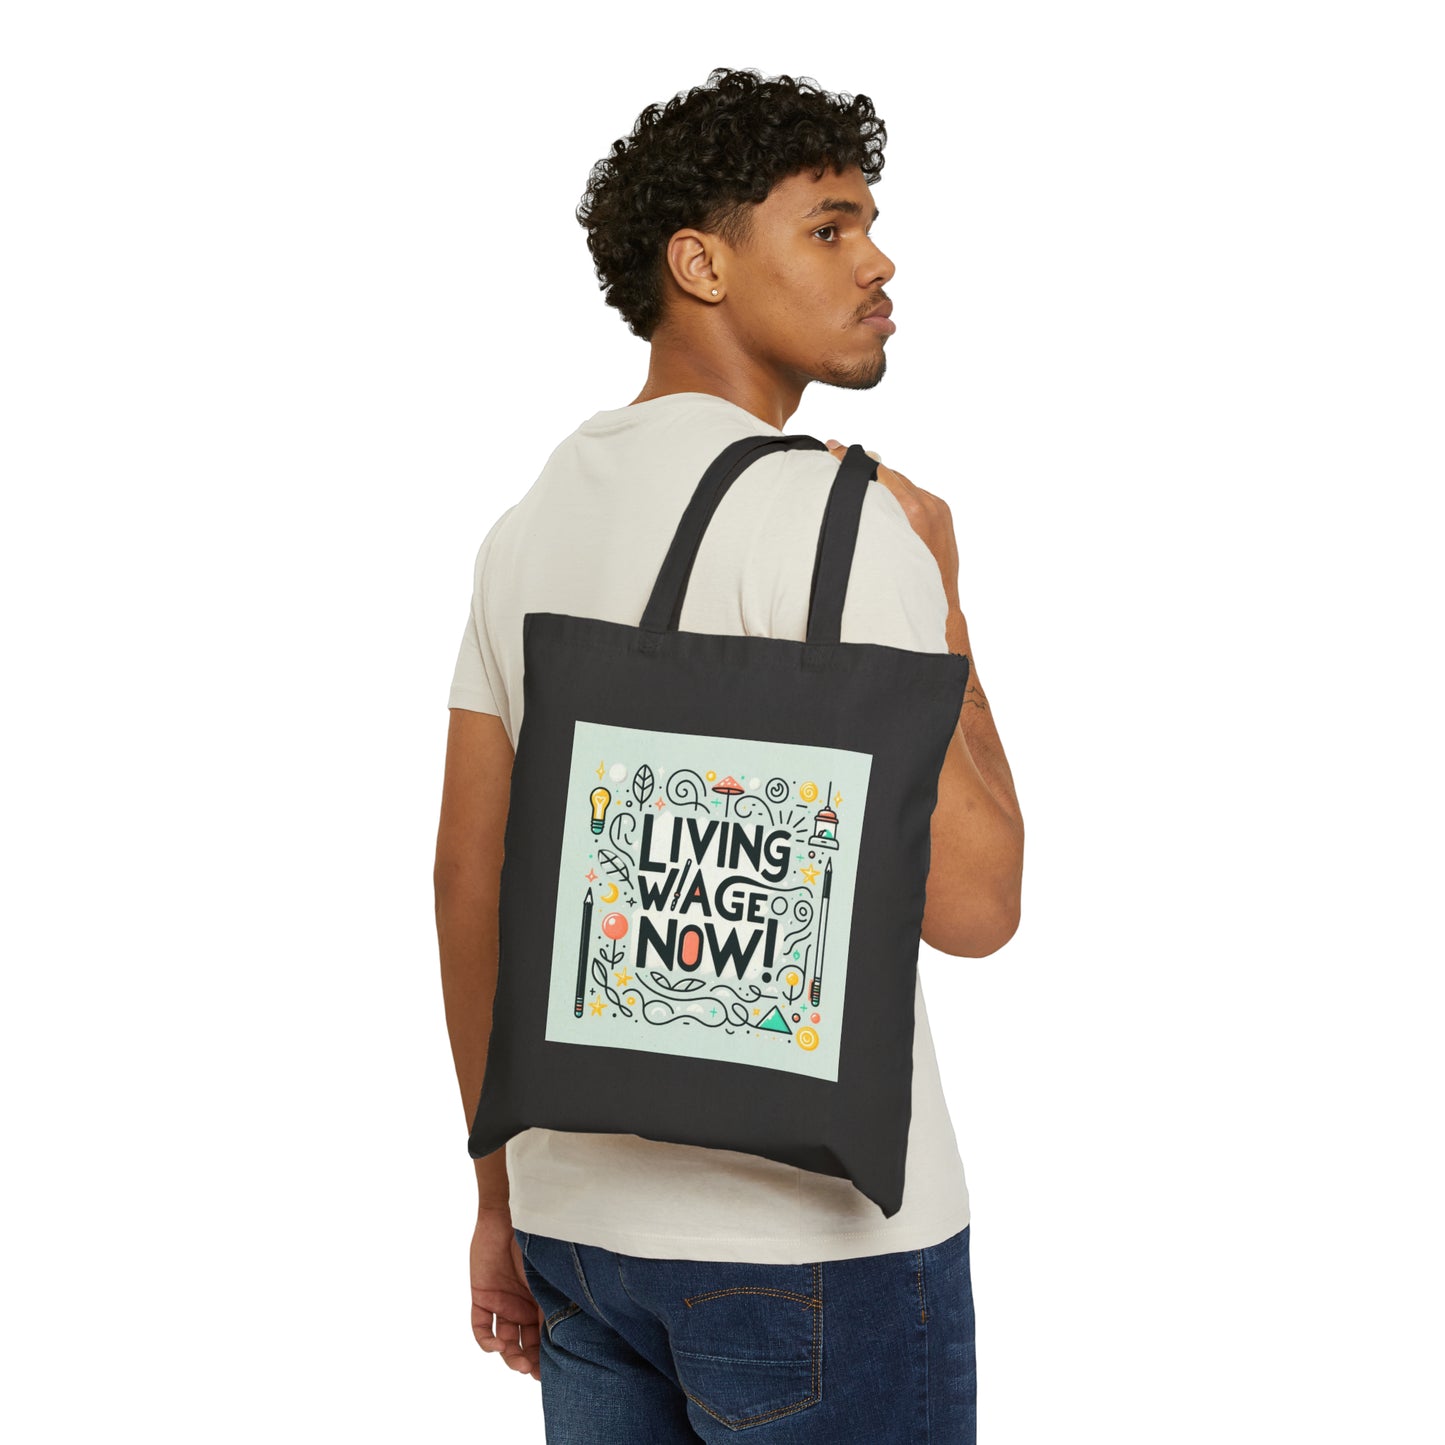 Living Wage Now! v4 (Canvas Tote Bag)